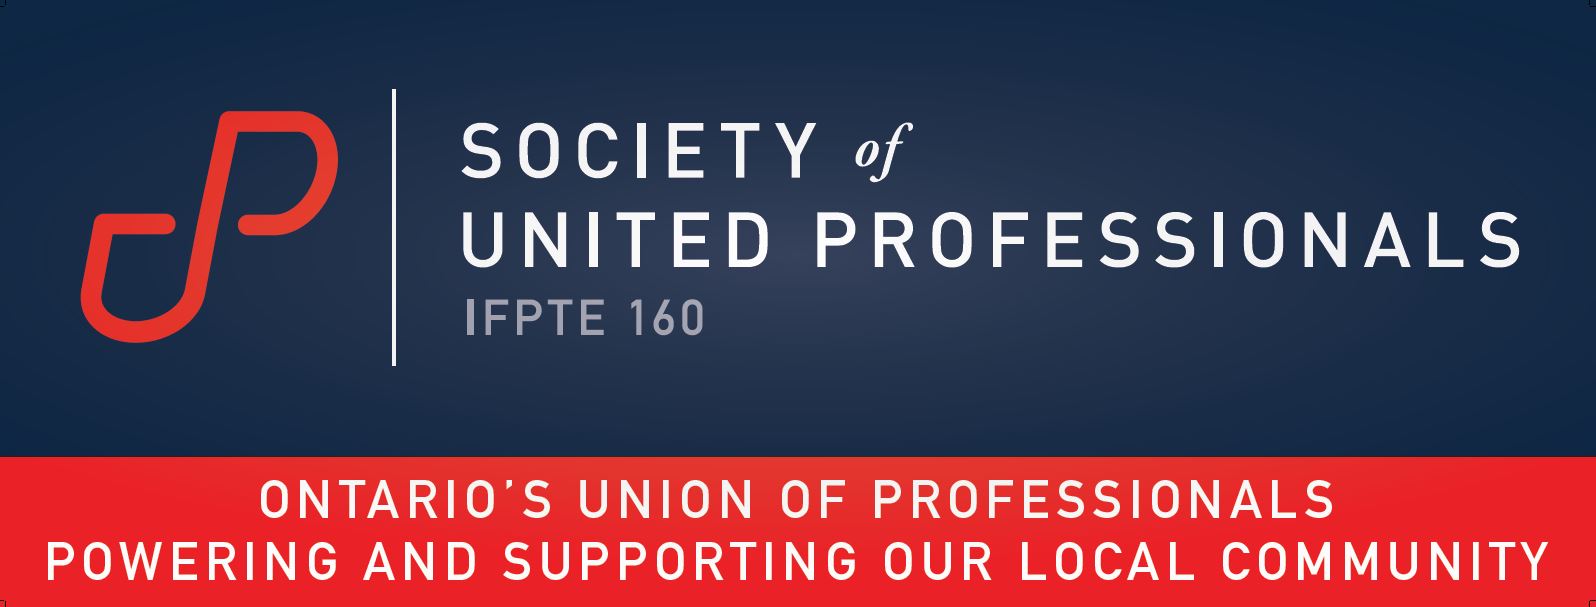 Society of United Professionals IFPTE 160. Ontario's Union of Professionals Powering and Supporting our Local Community.